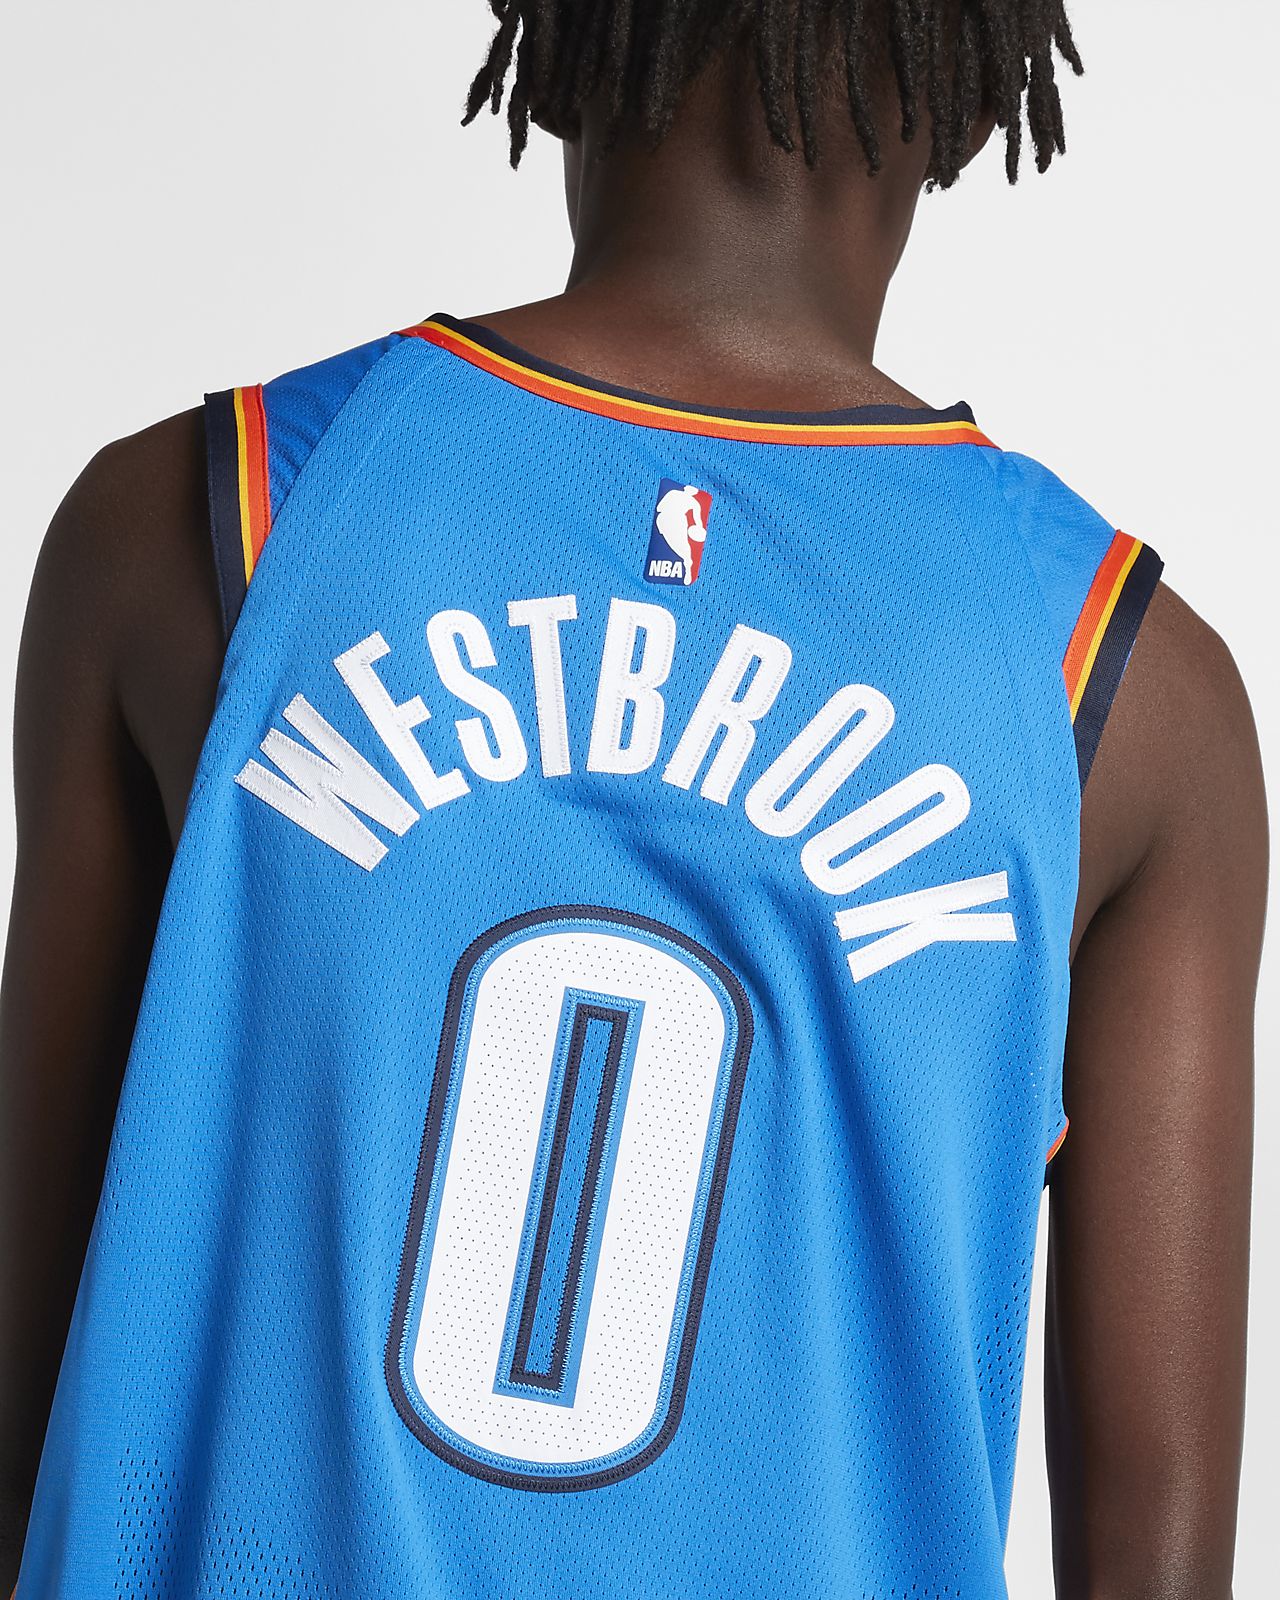 official russell westbrook jersey